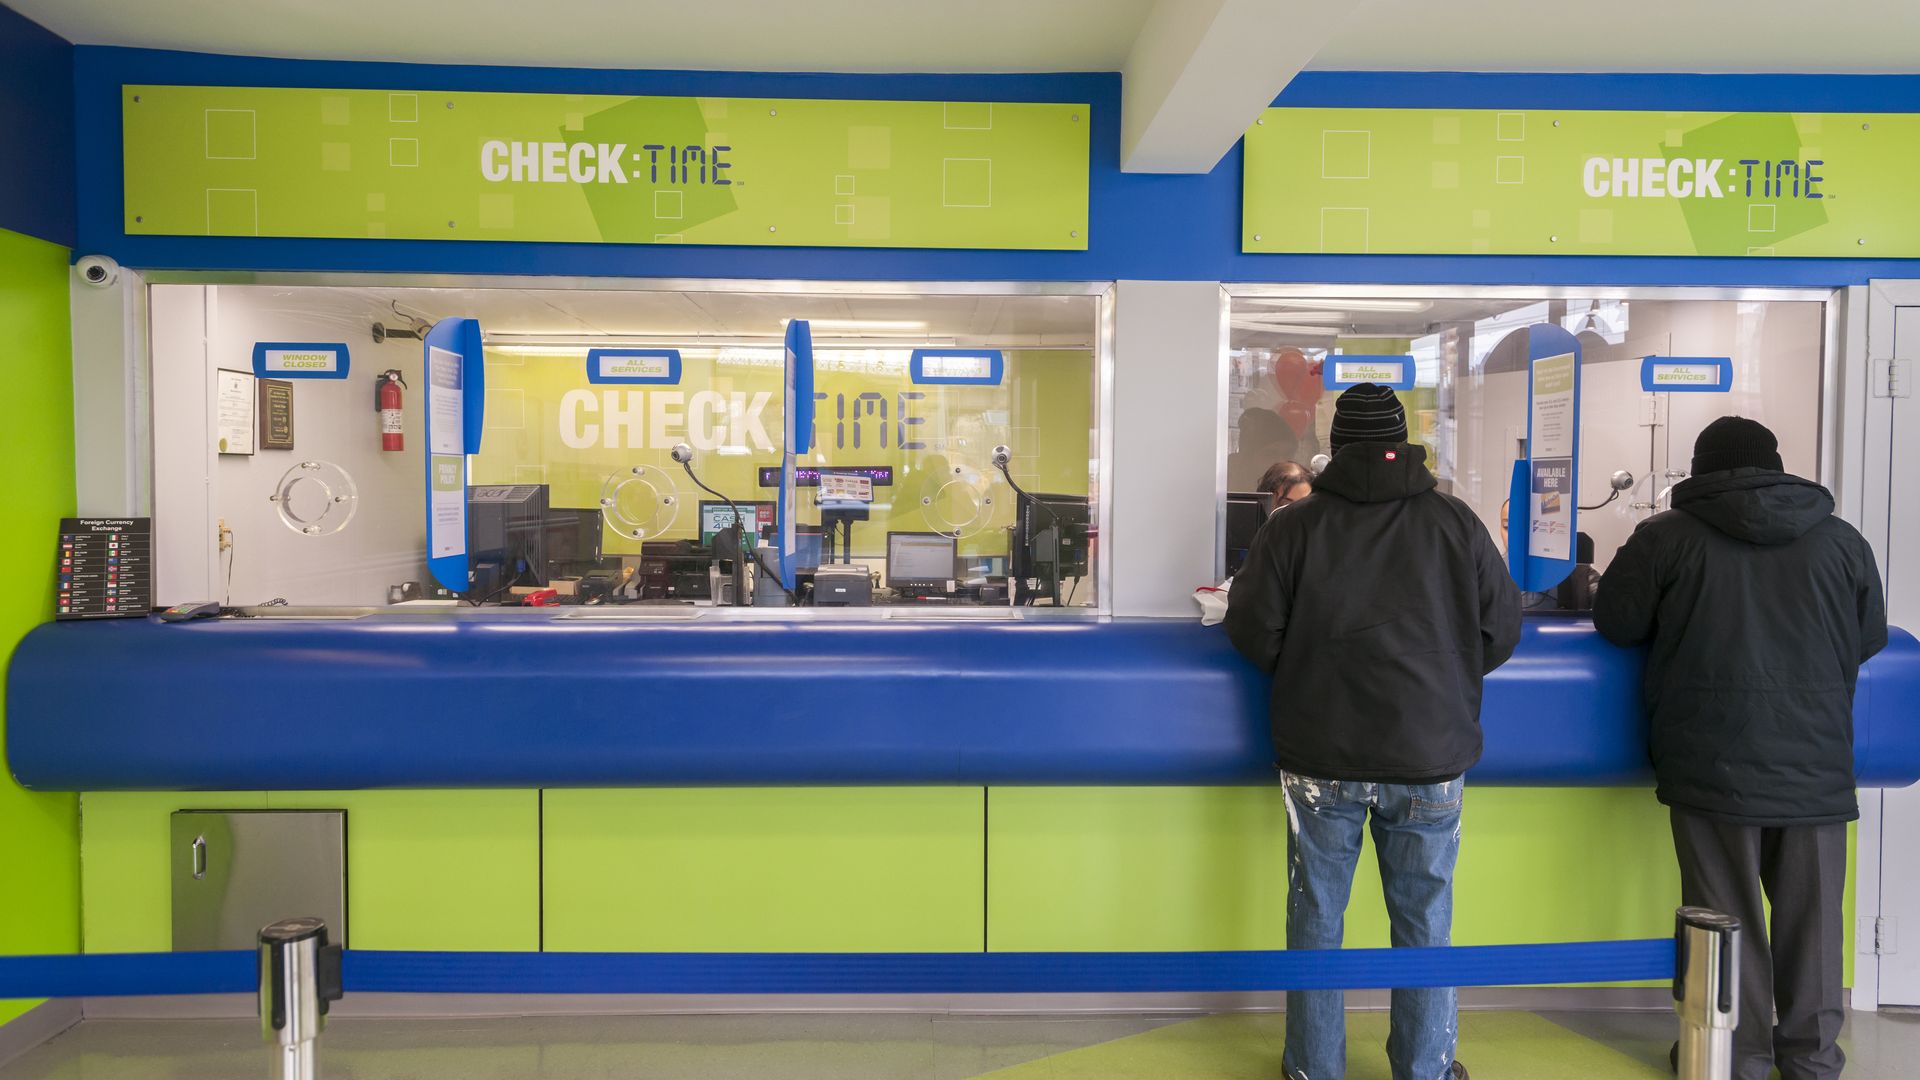 Customers in the newly remodeled branch of Check:Time in the Williamsburg neighborhood of Brooklyn in New York on Thursday, January 14, 2016. 